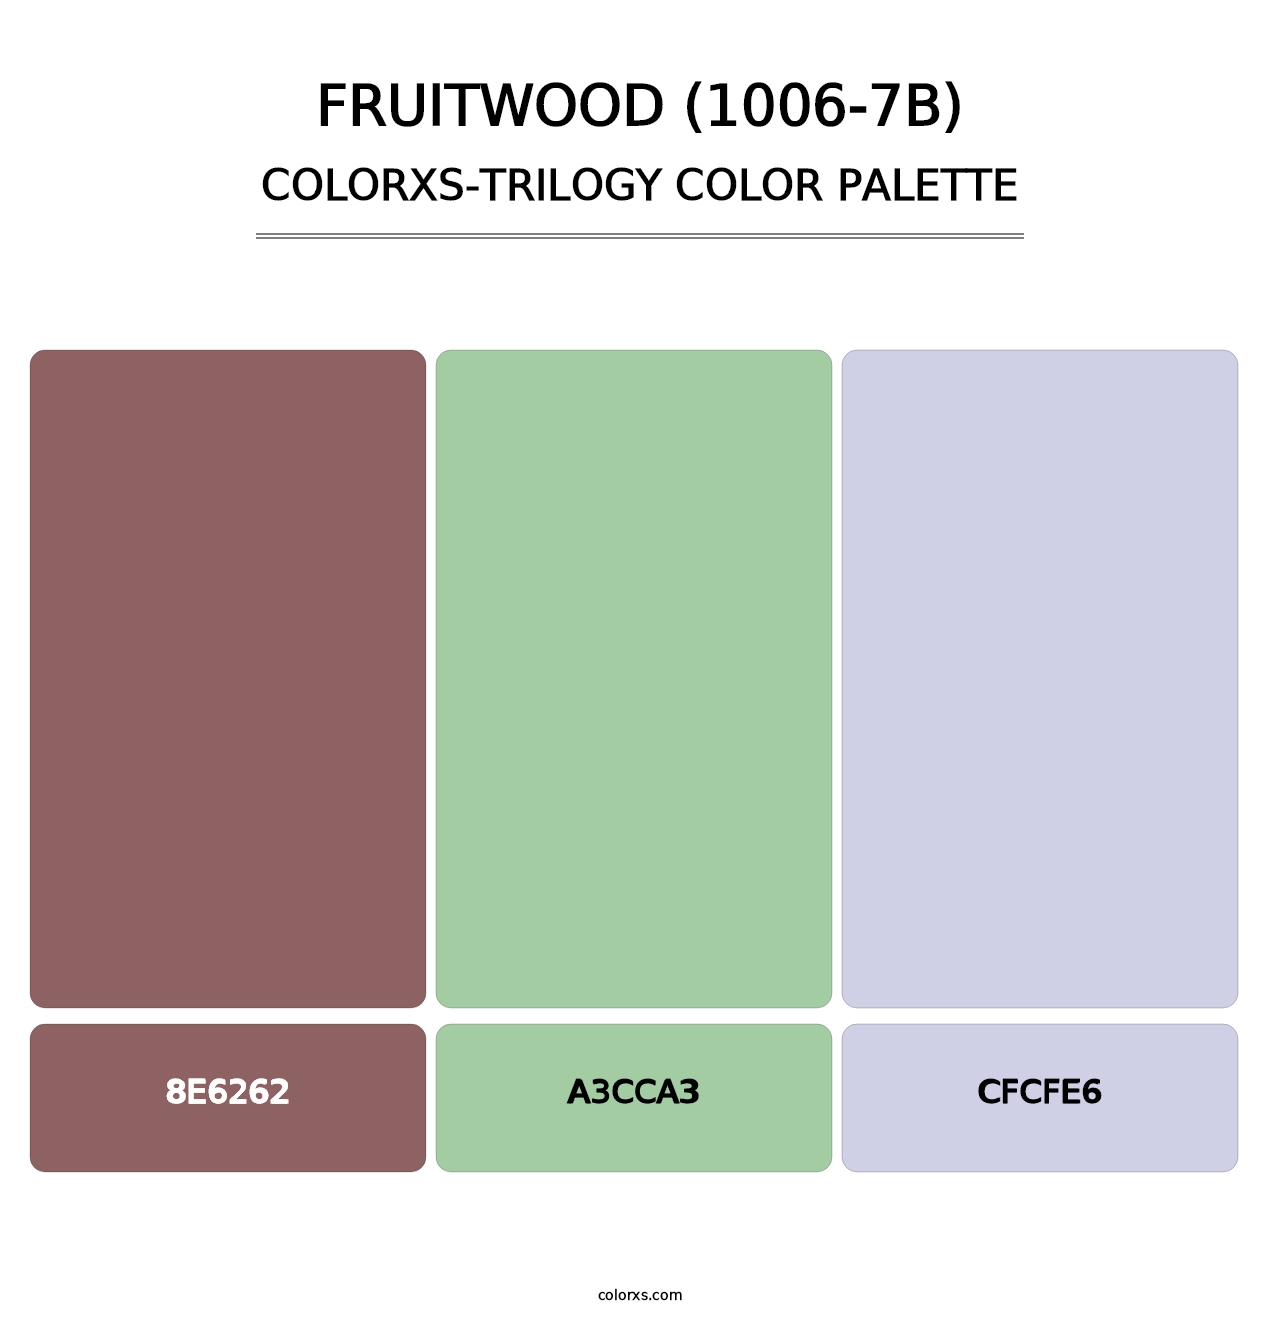 Fruitwood (1006-7B) - Colorxs Trilogy Palette